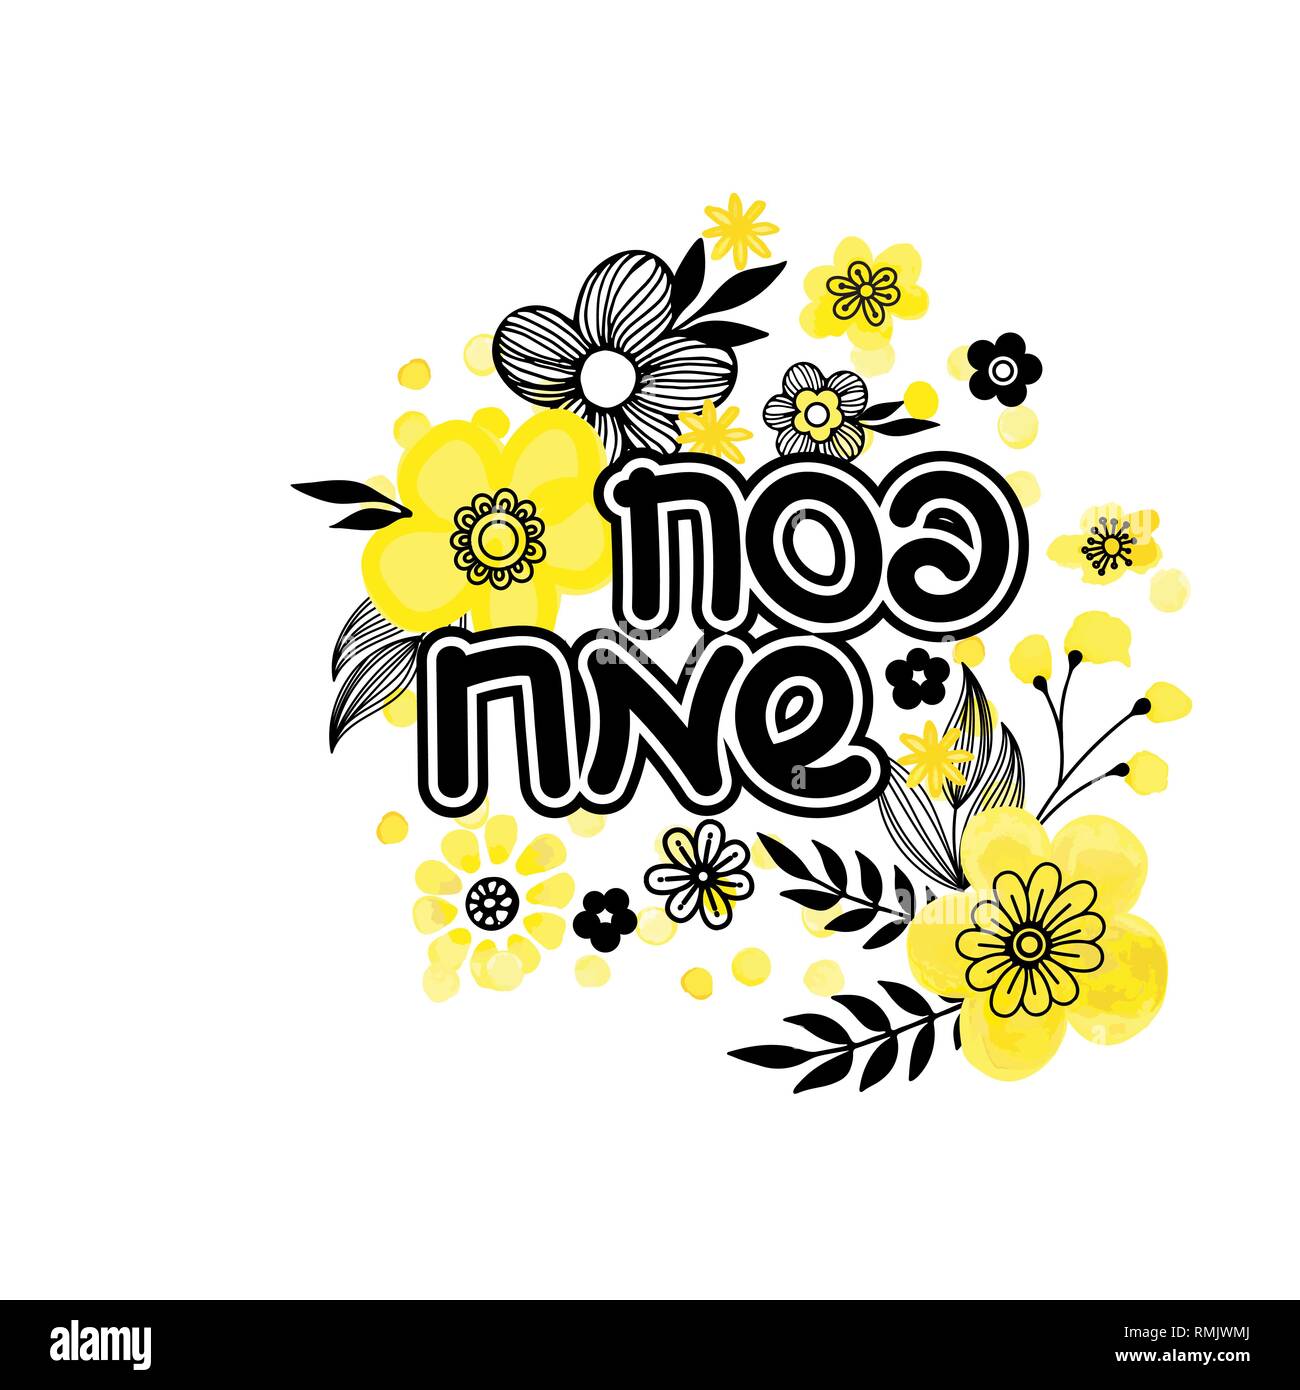 Jewish holiday greeting card template. Yellow and black spring flowers design. Text in Hebrew Happy Passover. Hand drawn vector illustration. Isolated on white background Stock Vector